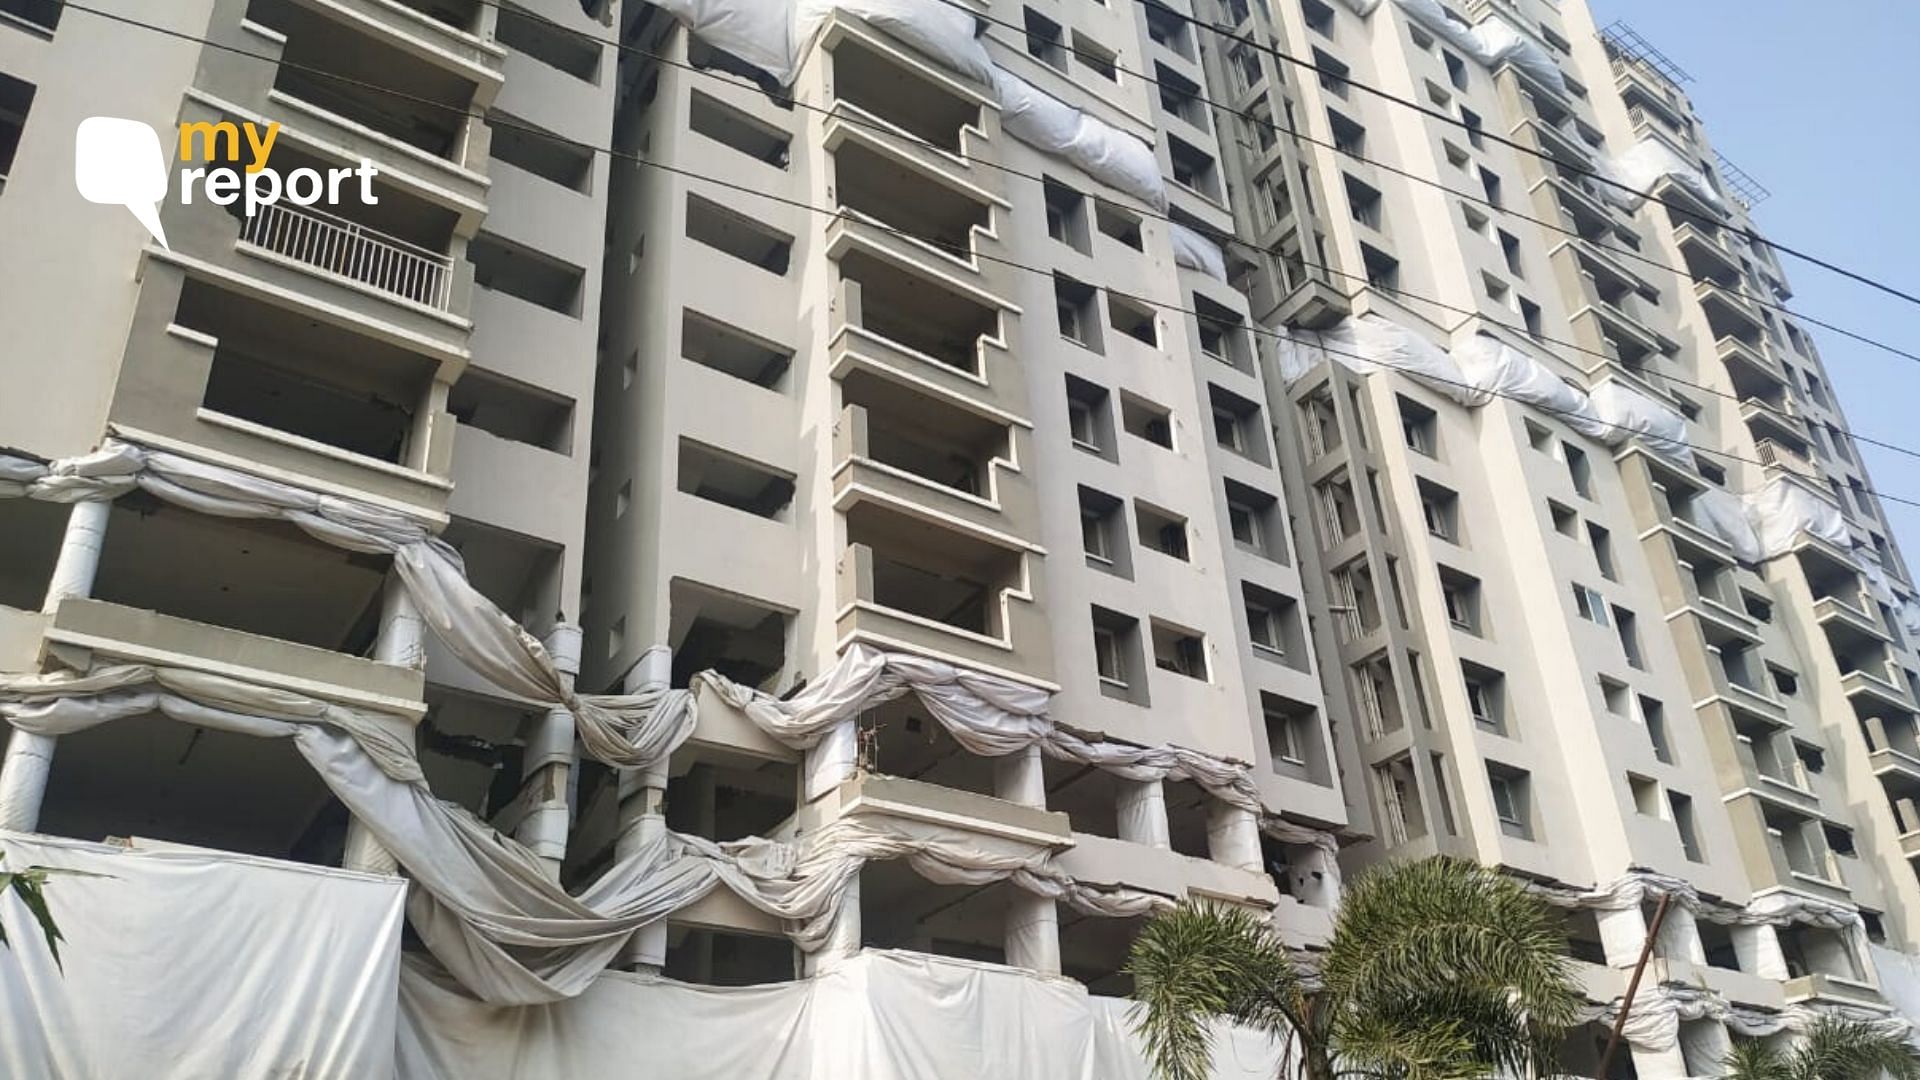 Holy Faith H20 in Maradu will be the first apartment building to be demolished.